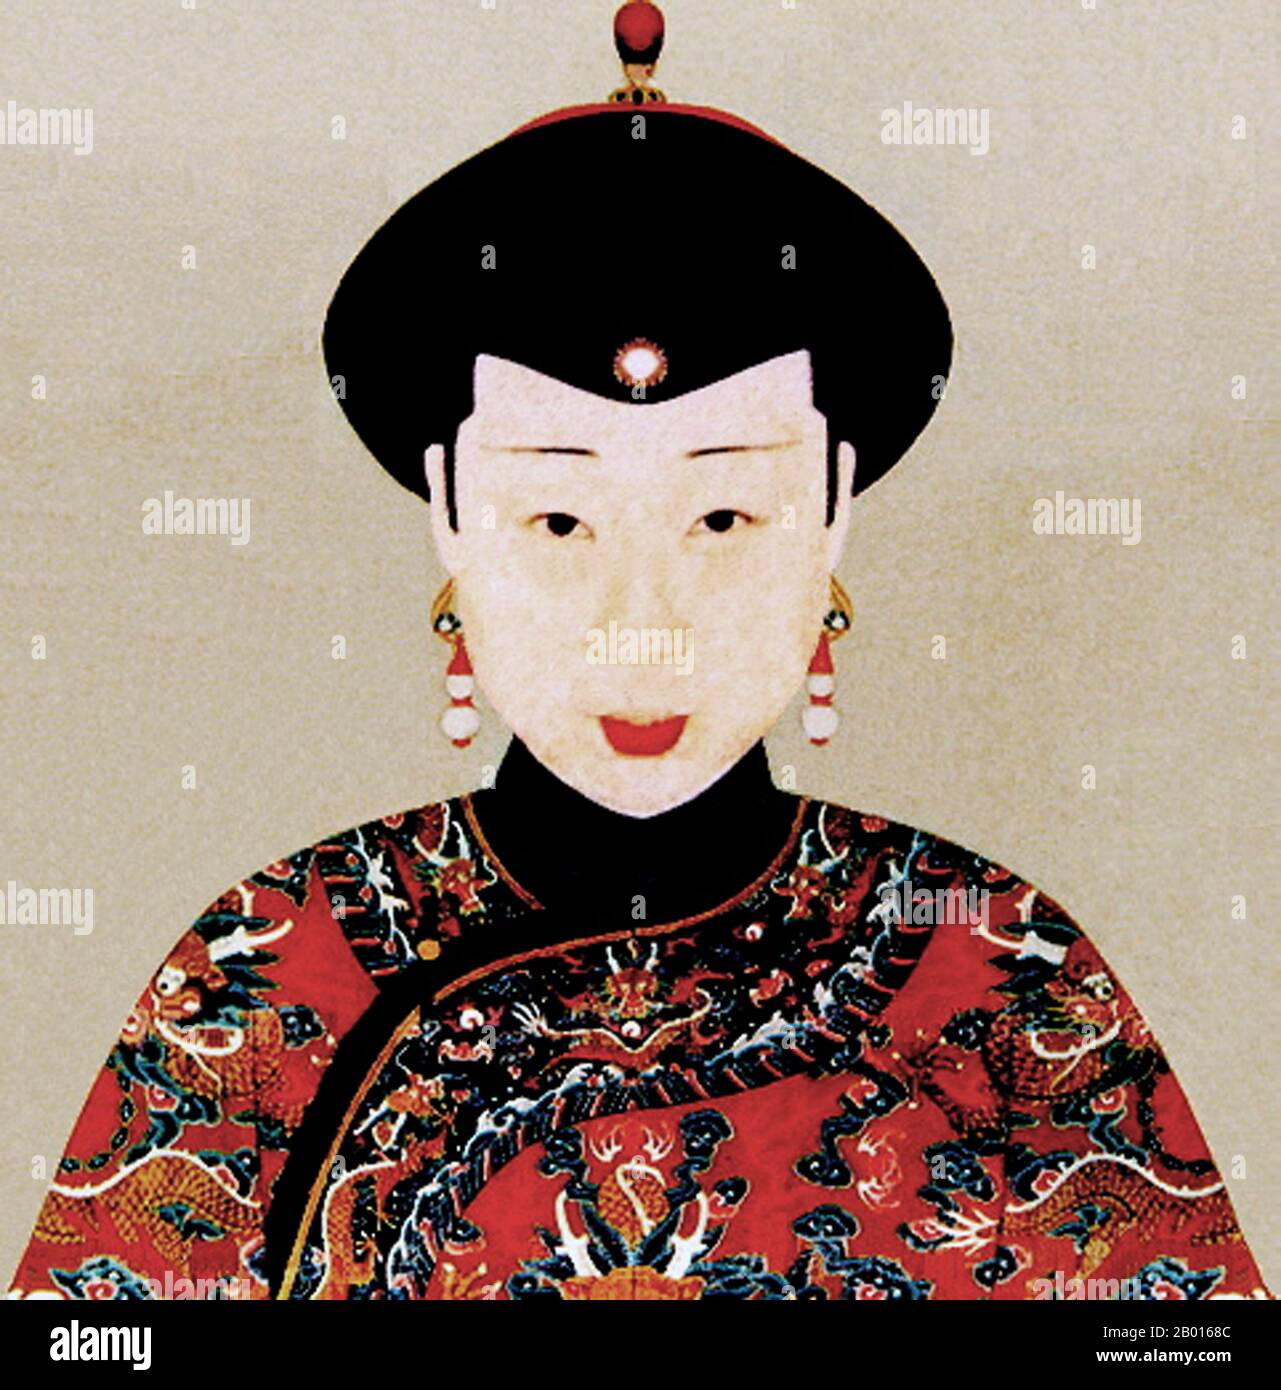 China: Empress Xiao Jing Cheng (19 June 1812 - 21 August 1855), fourth consort of the Daoguang Emperor. Handscroll painting, c. 1830-1855.  Empress Xiaojingcheng was a consort of the Daoguang Emperor, mother of Prince Yixin, also known as Prince Gong, and foster mother of Prince Yizhu, the Xianfeng Emperor. Hailing from the Khorchin Mongol Plain Blue Banner Borjigit clan, Lady Borjigit became 'Concubine Jing' in 1826, before being elevated to 'Consort Jing' the next year. She was given the title of 'Empress Dowager Kangci' eight days before her death, due to the machinations of her son Yixin. Stock Photo